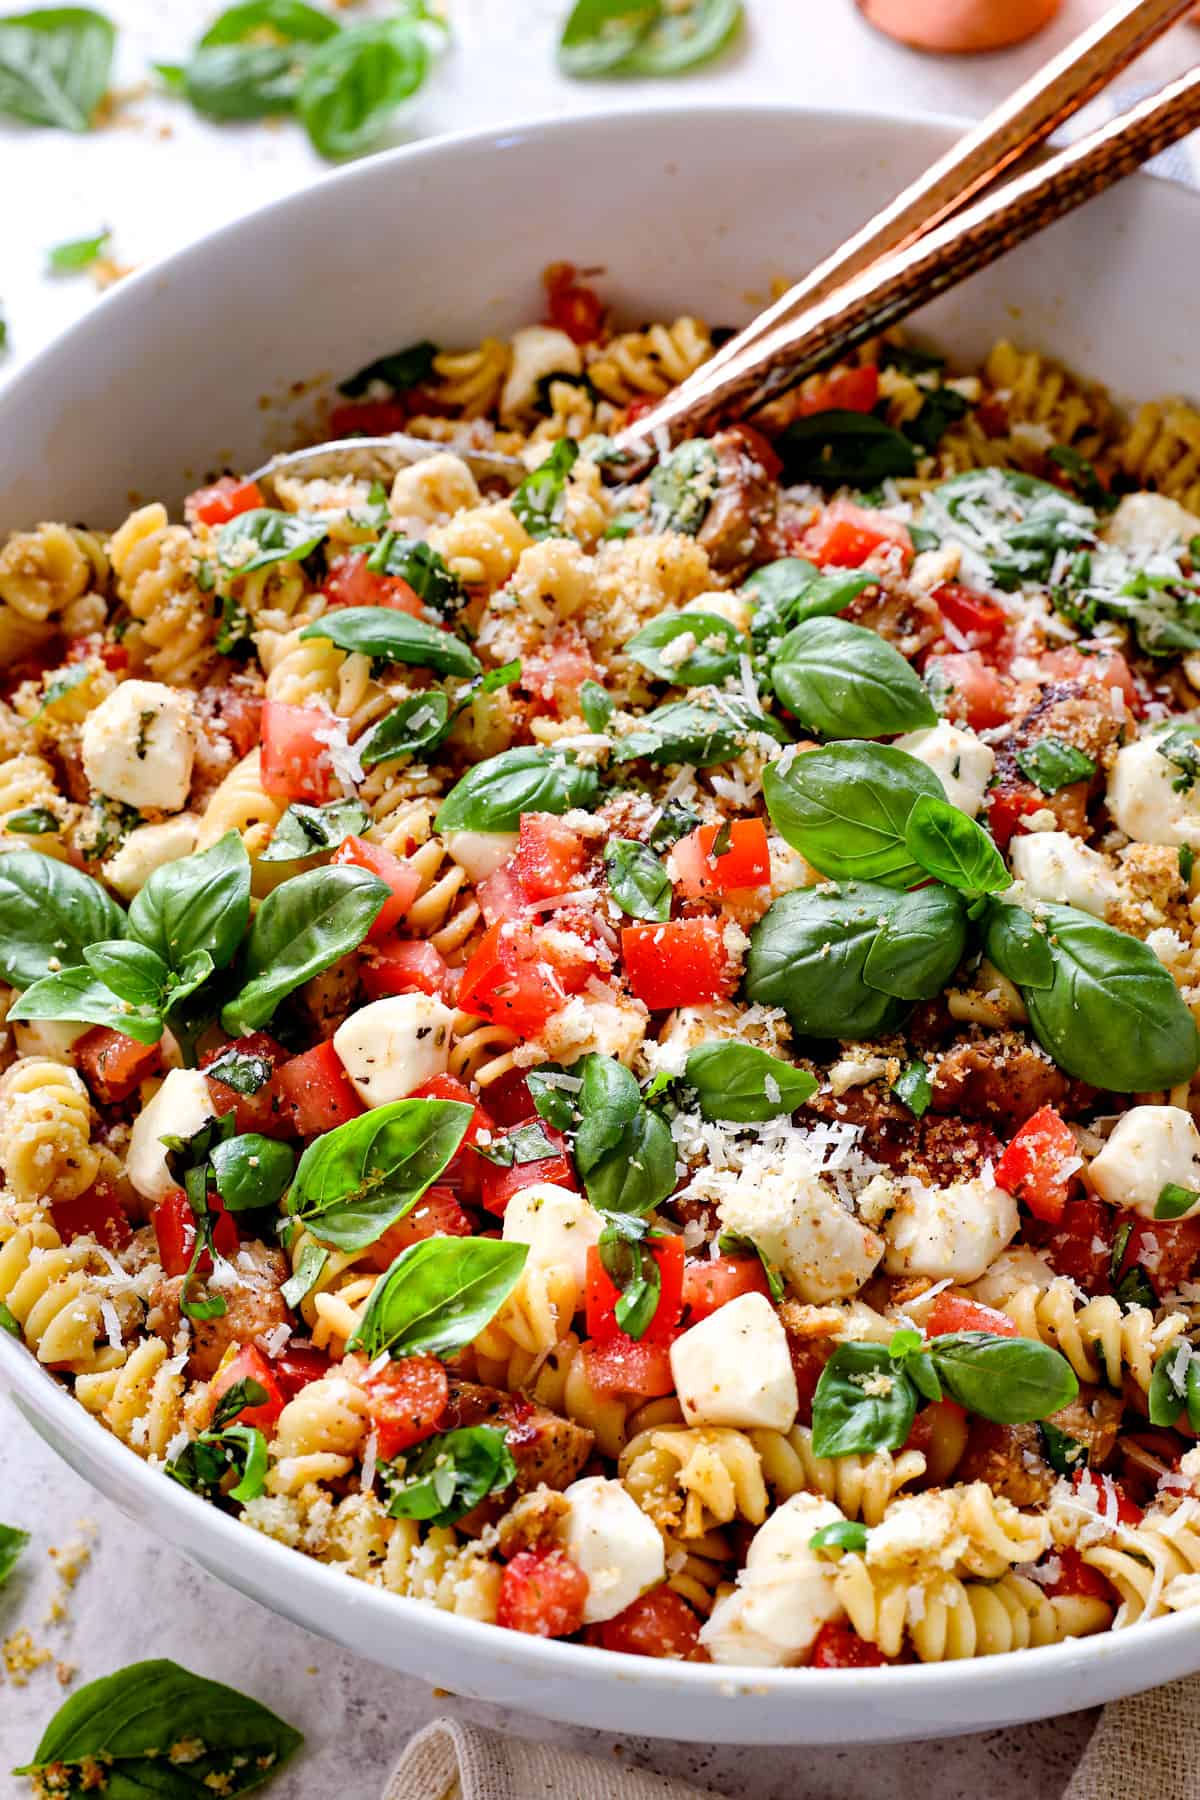 chicken pasta salad recipe tossed with tomatoes, basil Parmesan, mozzarella and balsamic vinaigrette